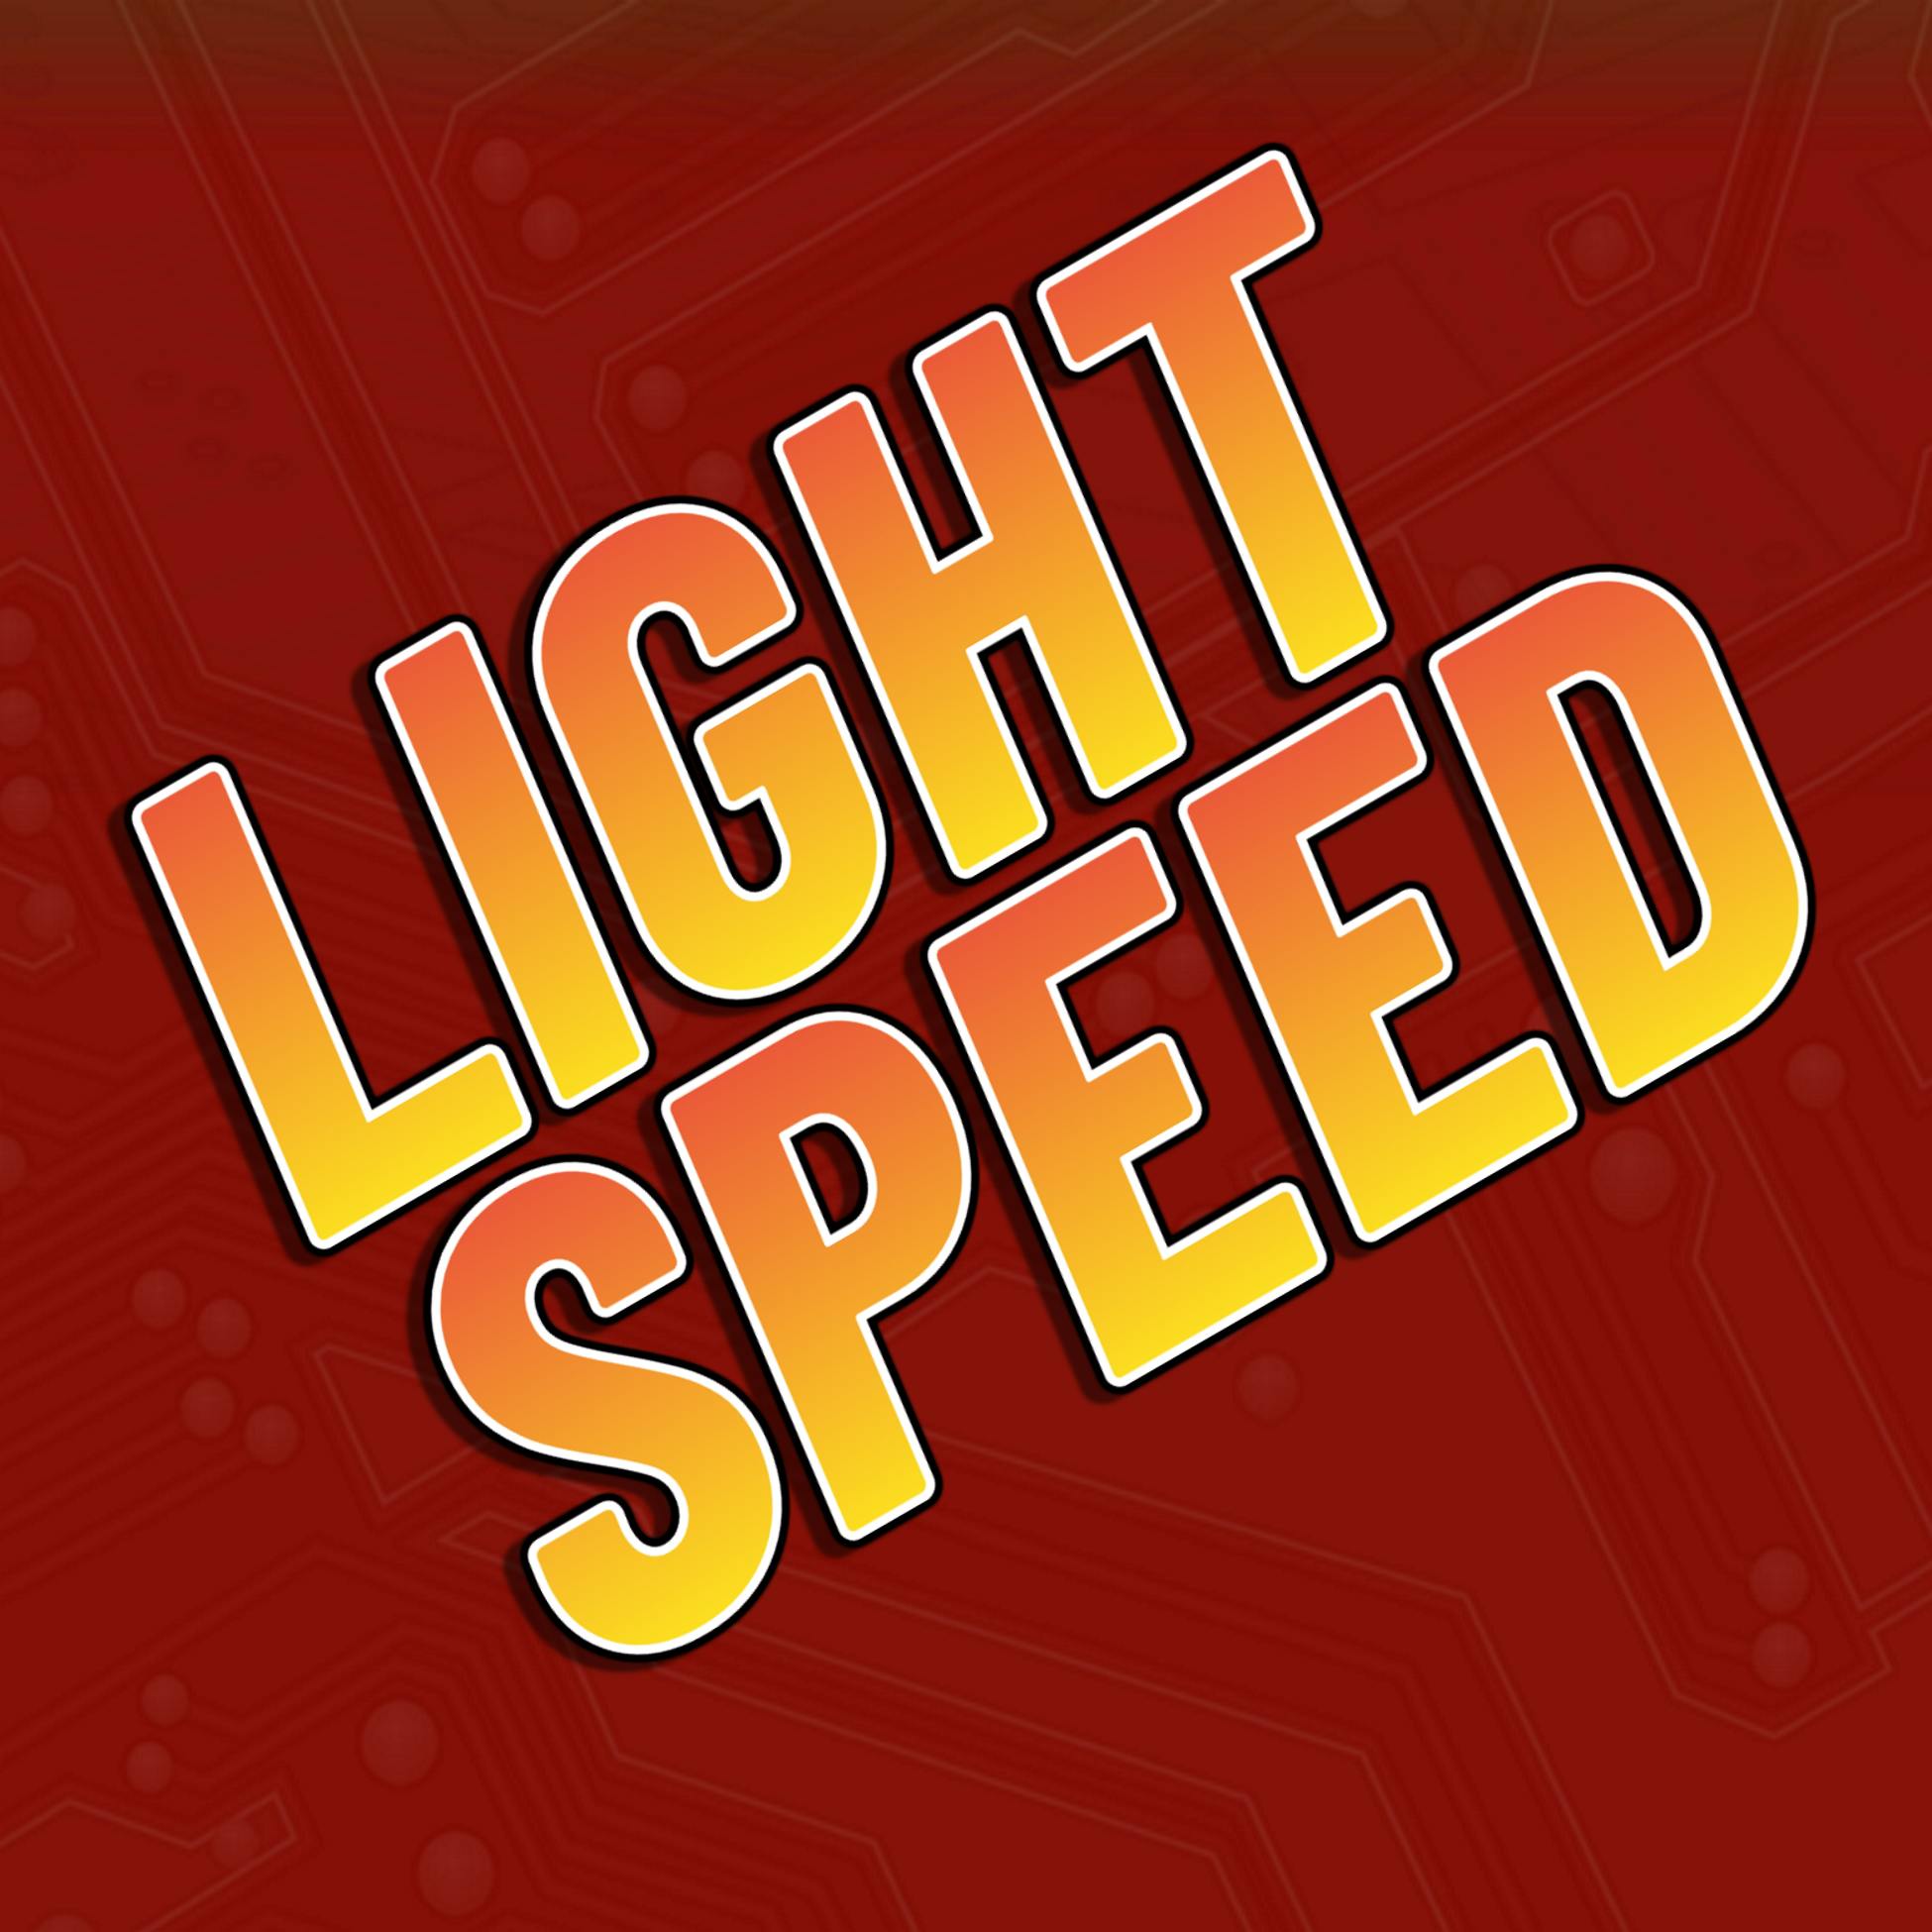 LIGHTSPEED MAGAZINE - Science Fiction and Fantasy Story Podcast (Sci-Fi | Audiobook | Short Stories)